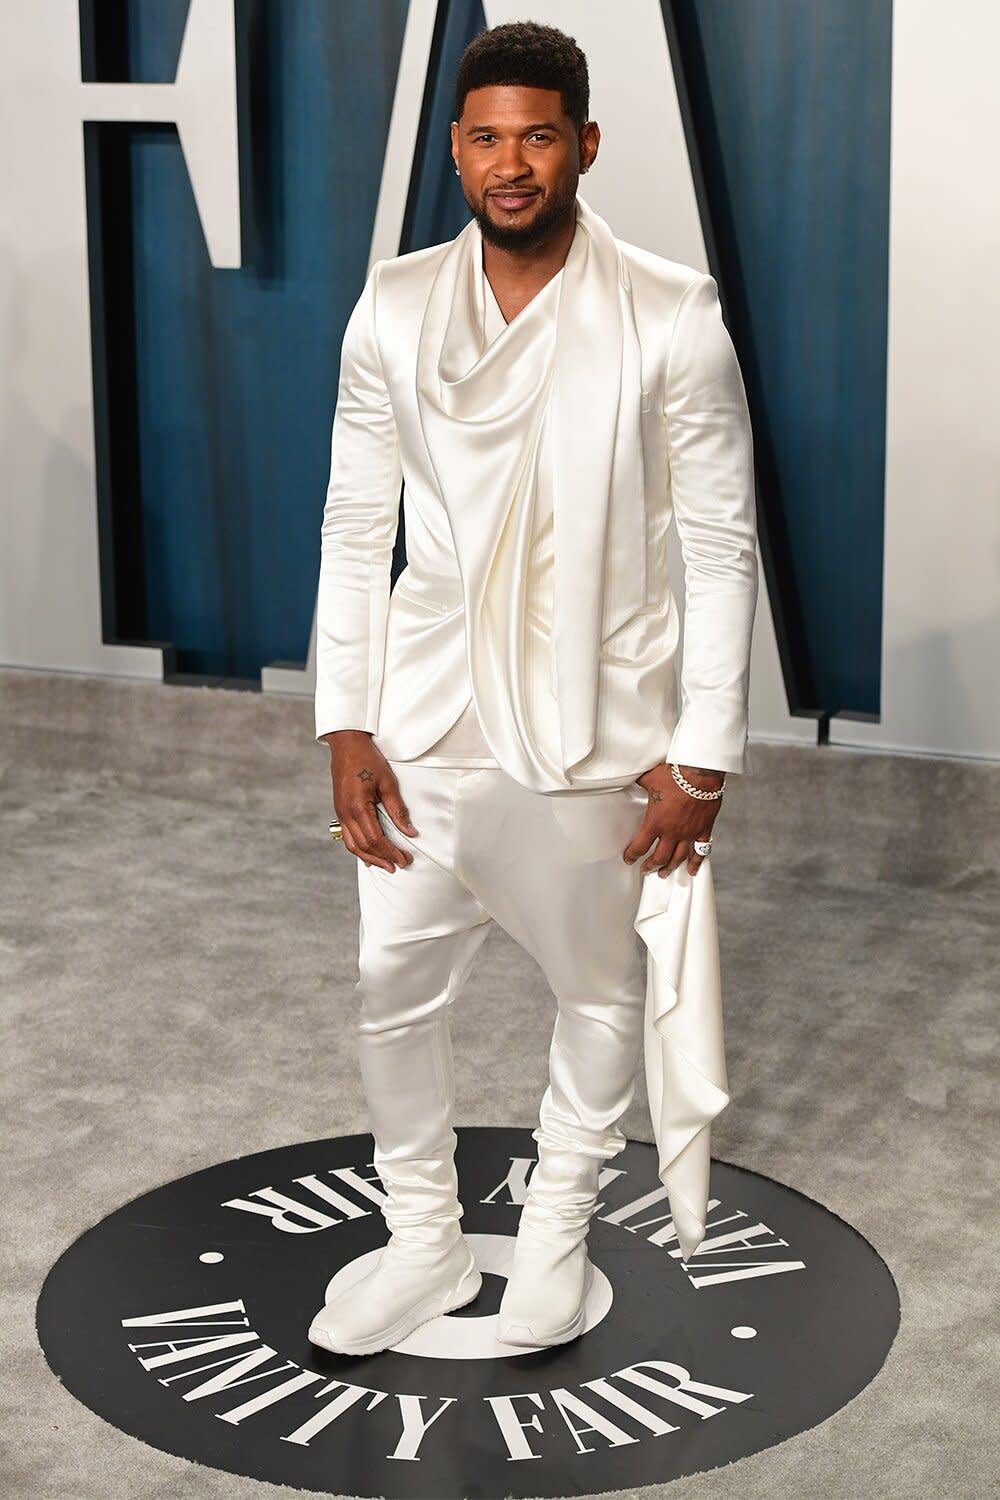 Usher attending the Vanity Fair Oscar Party held at the Wallis Annenberg Center for the Performing Arts in Beverly Hills, Los Angeles, California, USA.